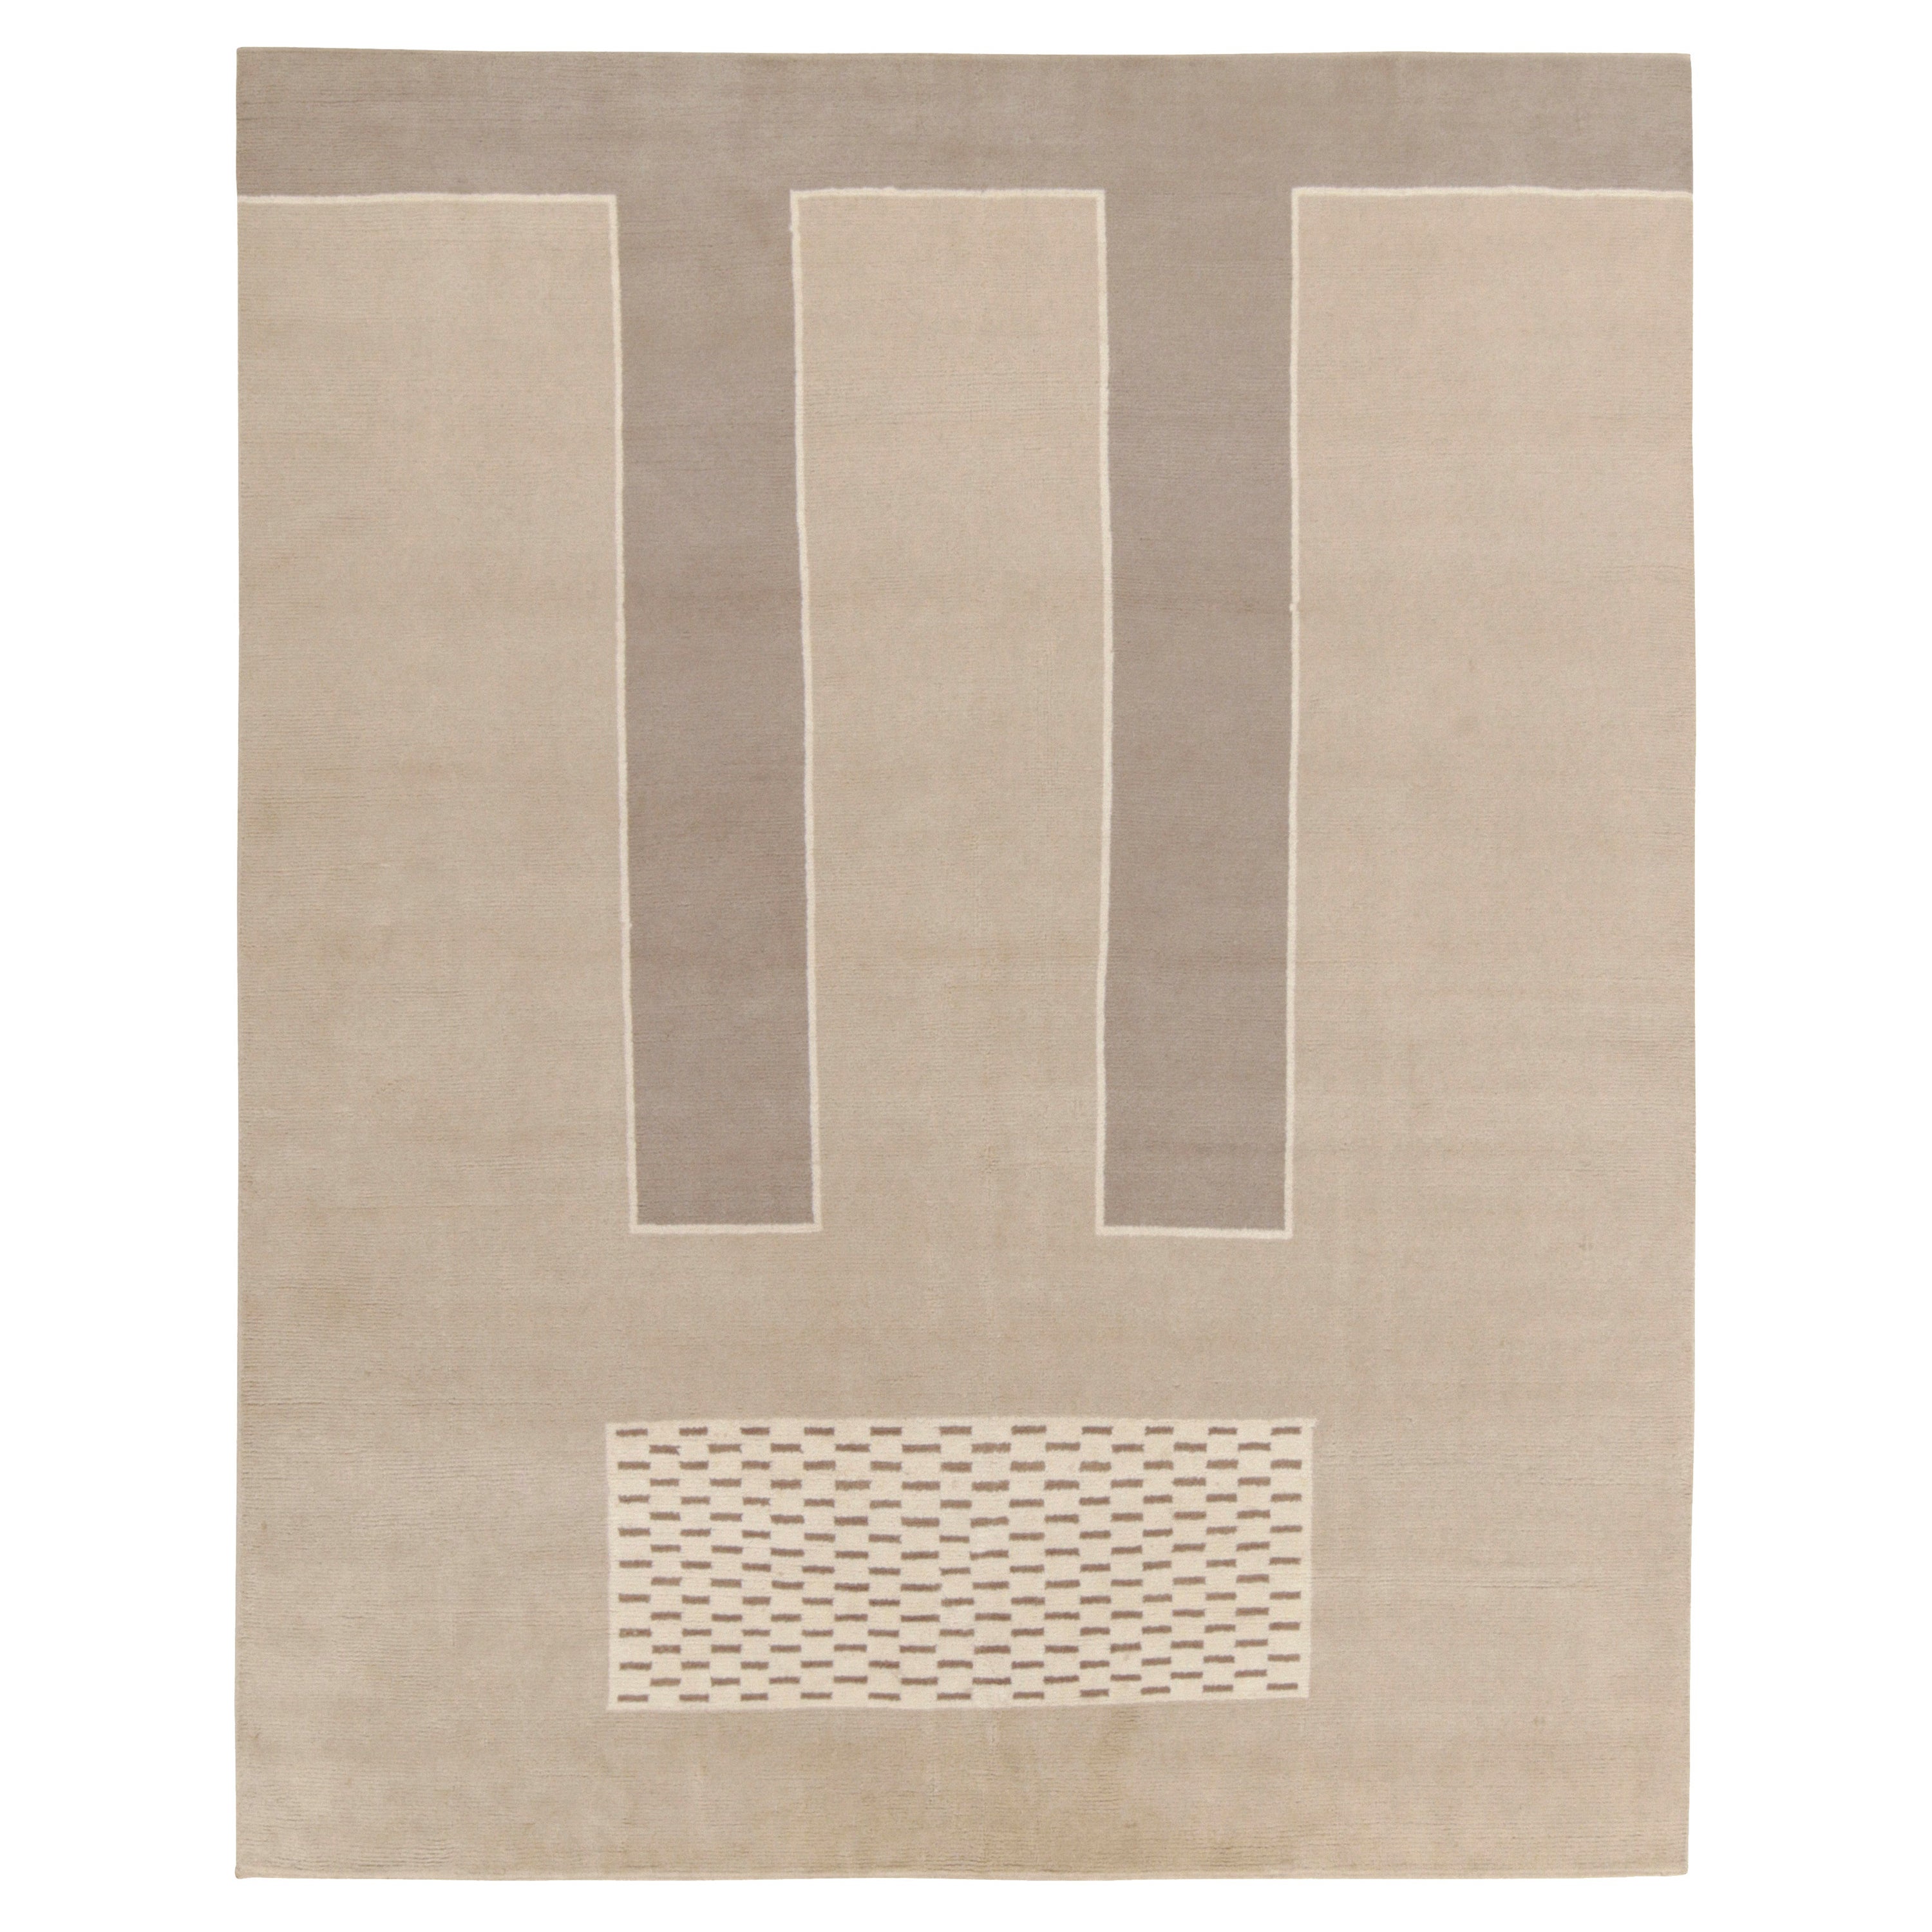 Rug & Kilim’s Art Deco style rug in Beige and Gray Geometric Patterns For Sale